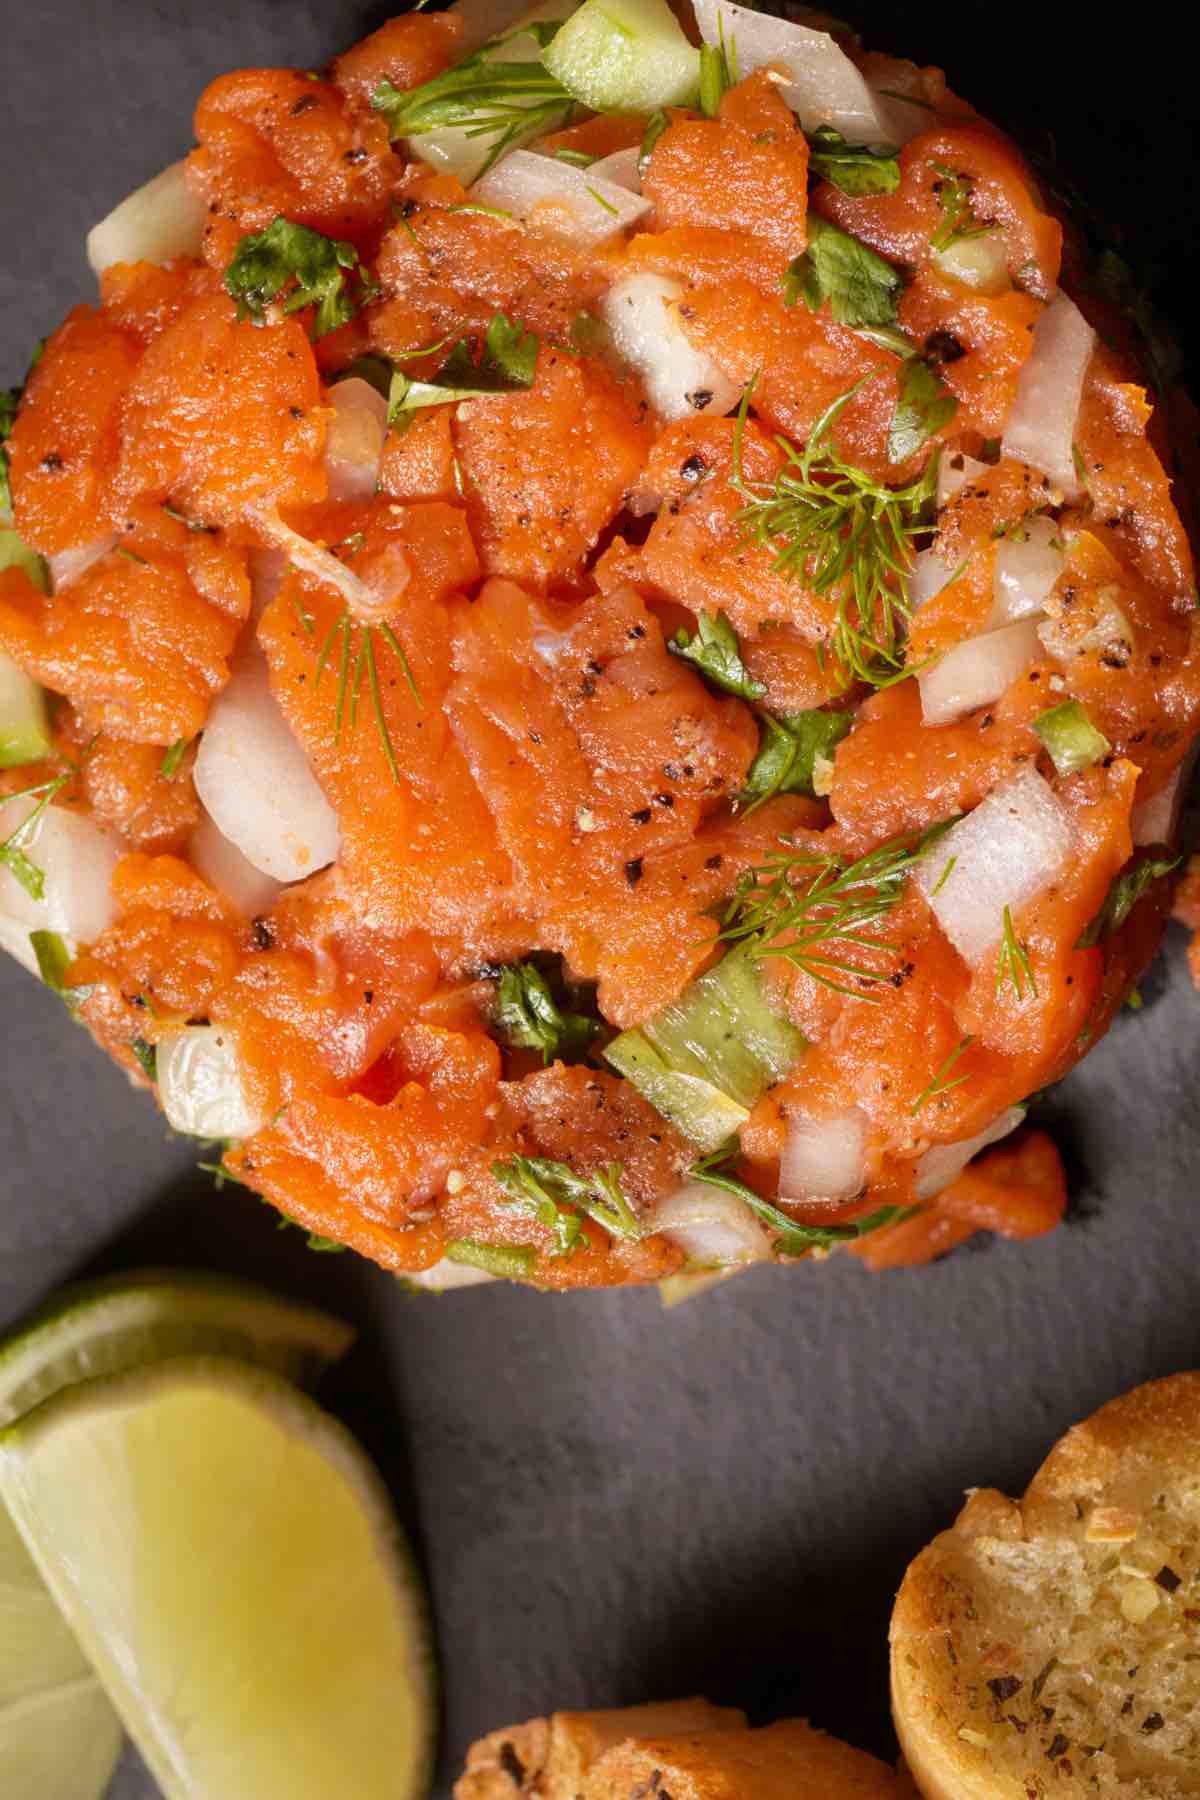 You’ll hardly find a more elegant appetizer than Salmon Tartare. Despite its fancy name, this dish is deceptively easy to prepare with just a few simple ingredients. Using sashimi-grade salmon and classic seasonings, you’ll have a sophisticated platter that’s sure to impress.